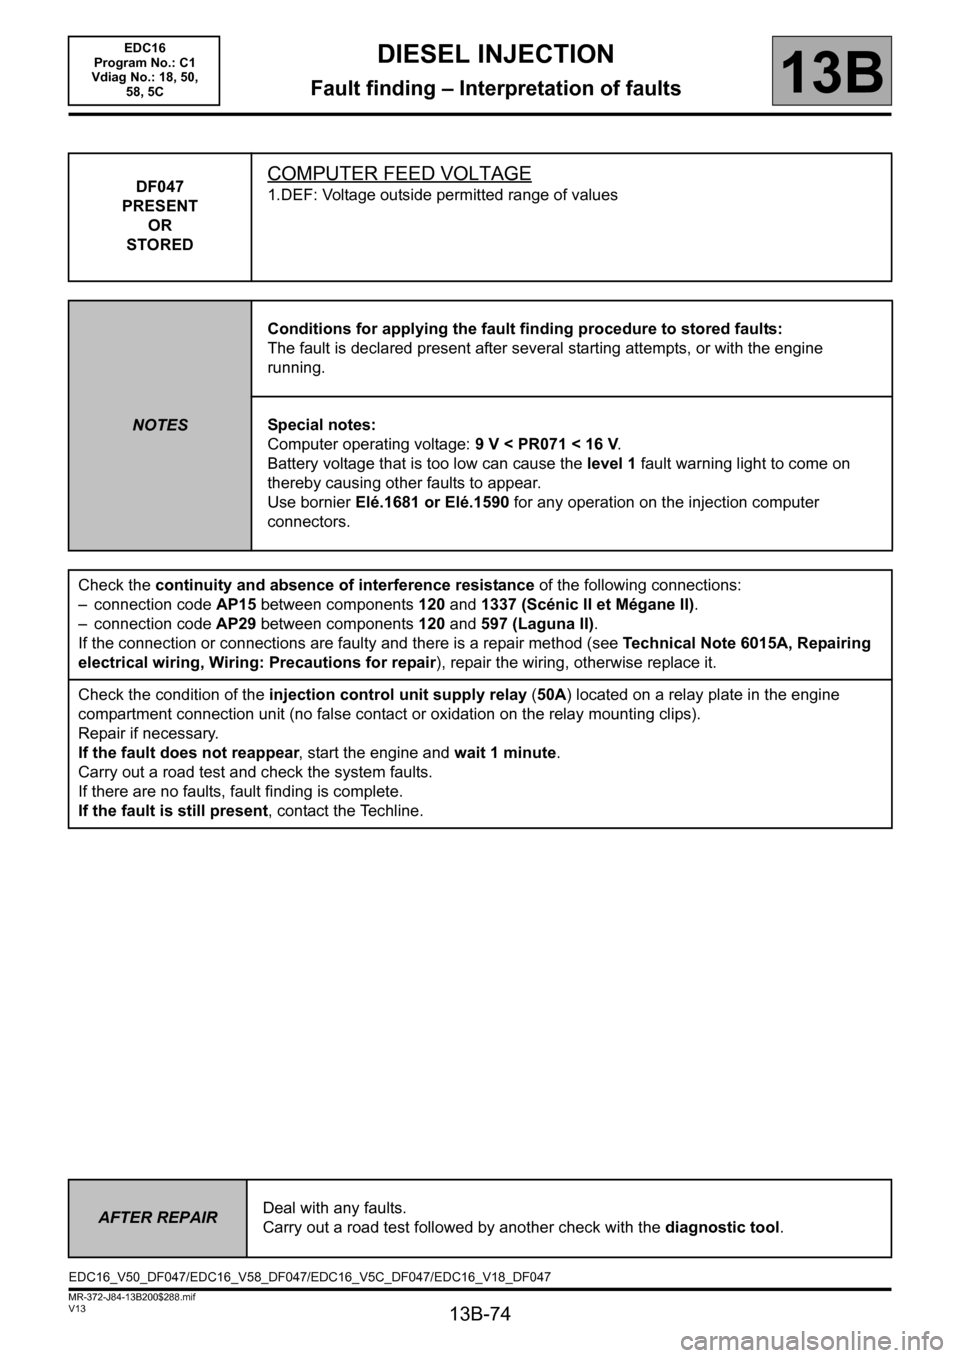 RENAULT SCENIC 2011 J95 / 3.G Engine And Peripherals EDC16 Workshop Manual 13B-74
MR-372-J84-13B200$288.mif
V13
13B
DIESEL INJECTION
Fault finding – Interpretation of faults
DF047
PRESENT
OR
STOREDCOMPUTER FEED VOLTAGE
1.DEF: Voltage outside permitted range of values
NOTES